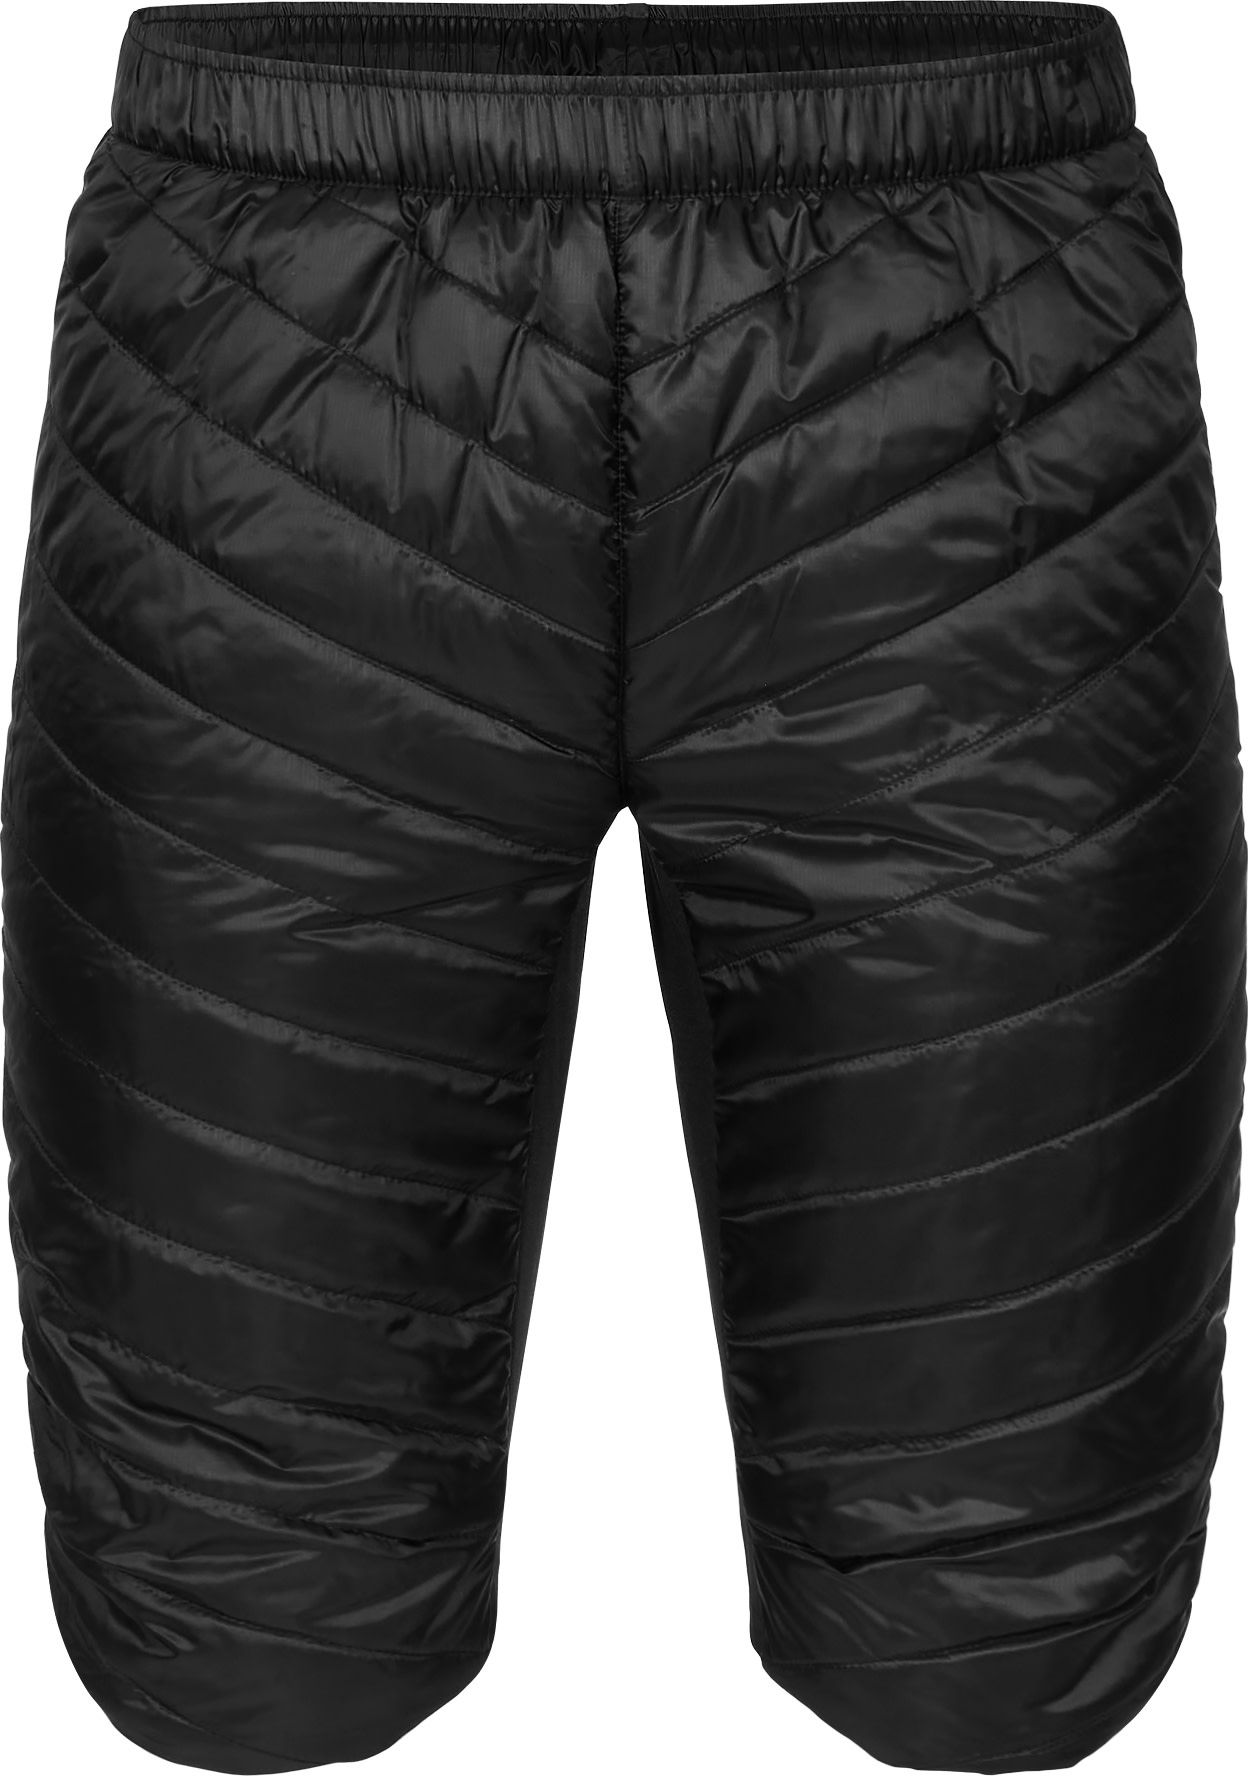 Men\'s Stretch Padded Over Short | | beauty here Stretch Men\'s Over Black Black Padded Short beauty Buy Outnorth